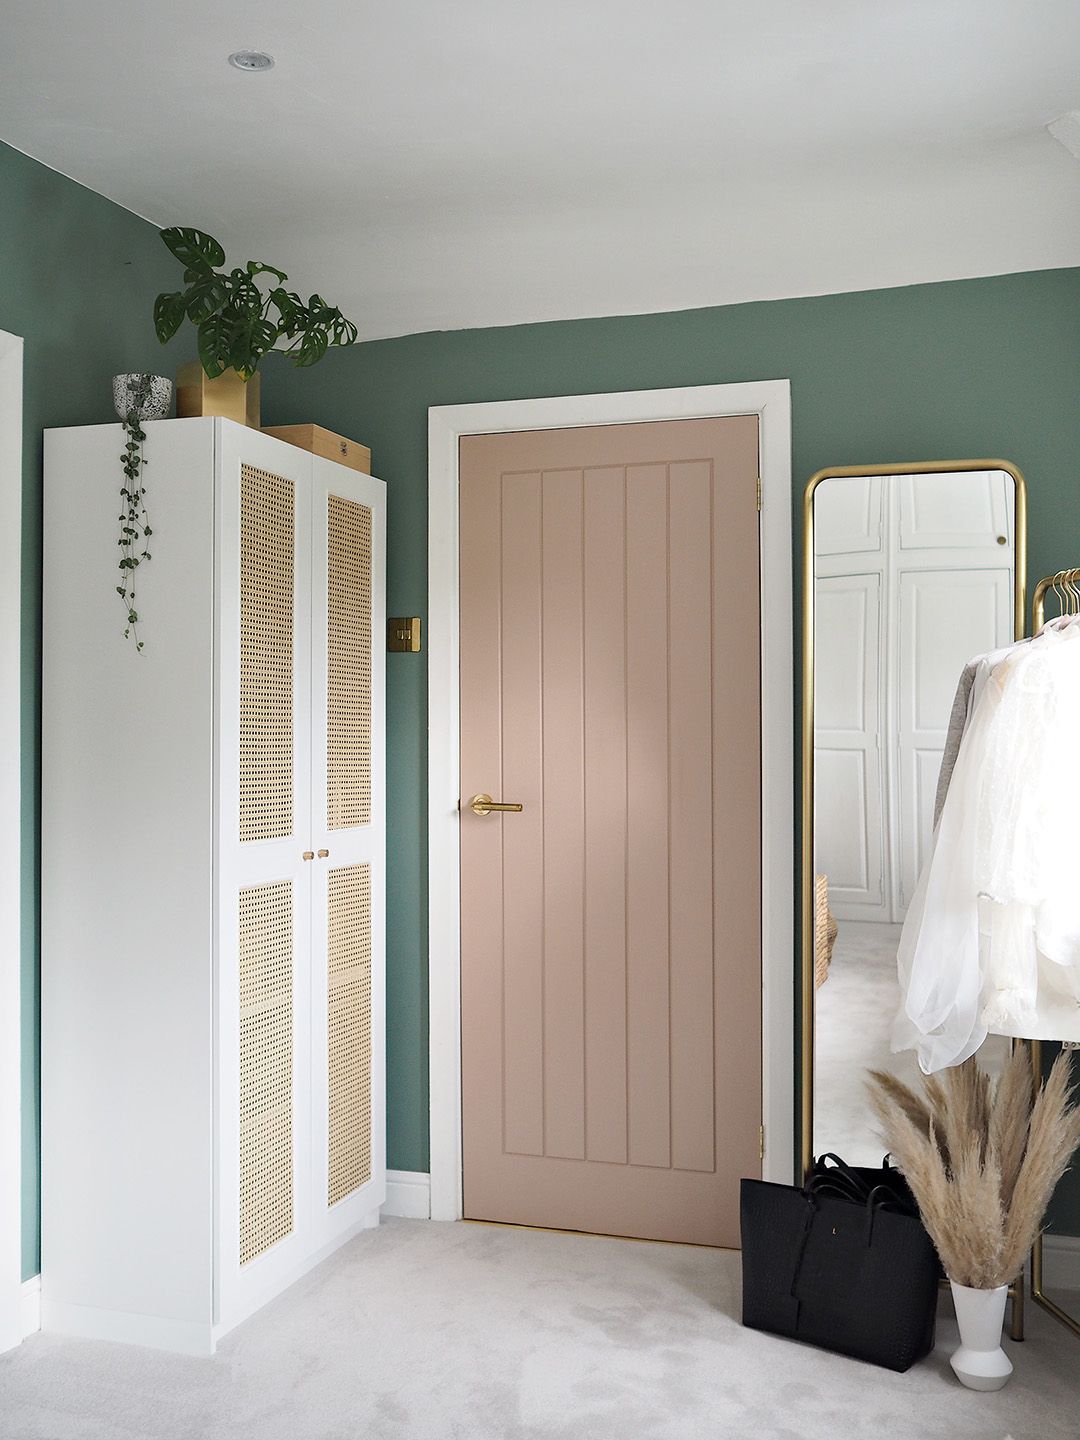 Rattan Cane Ikea Wardrobe Diy Hack For Under £170 | Lust Living With White Rattan Wardrobes (View 10 of 15)